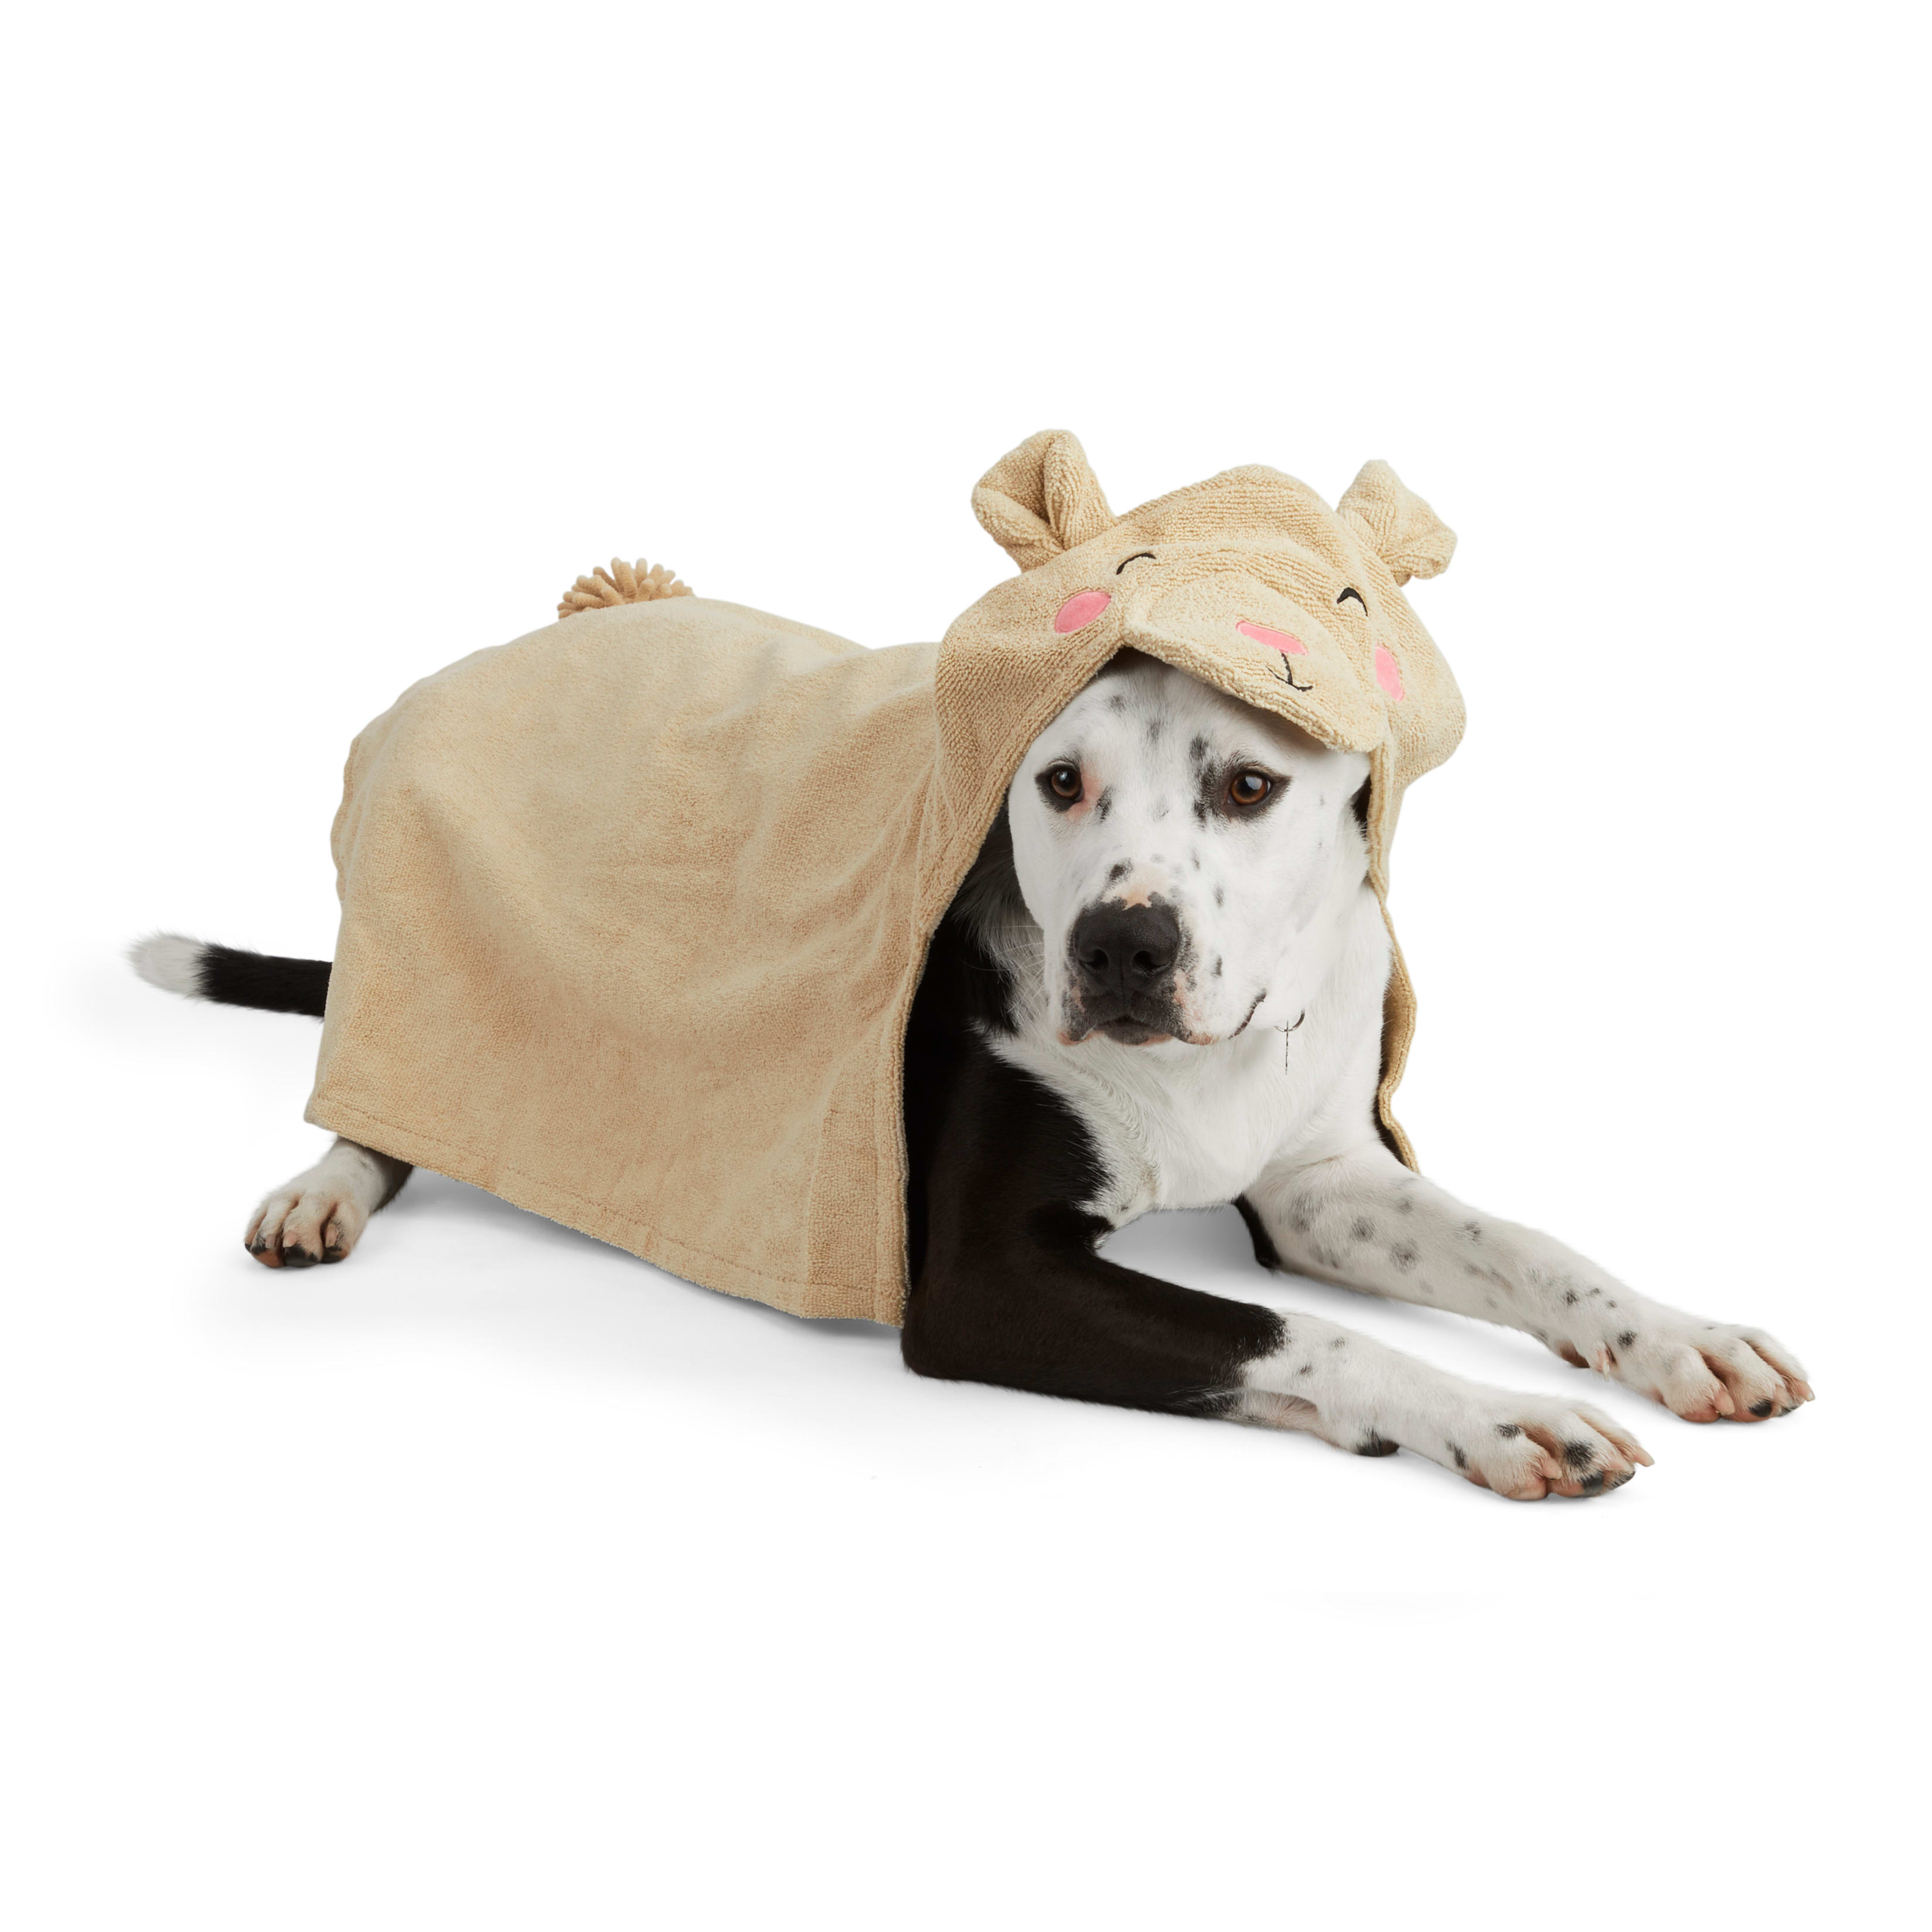 Bamboo Bath Towel for Dogs by Pets So Good Large